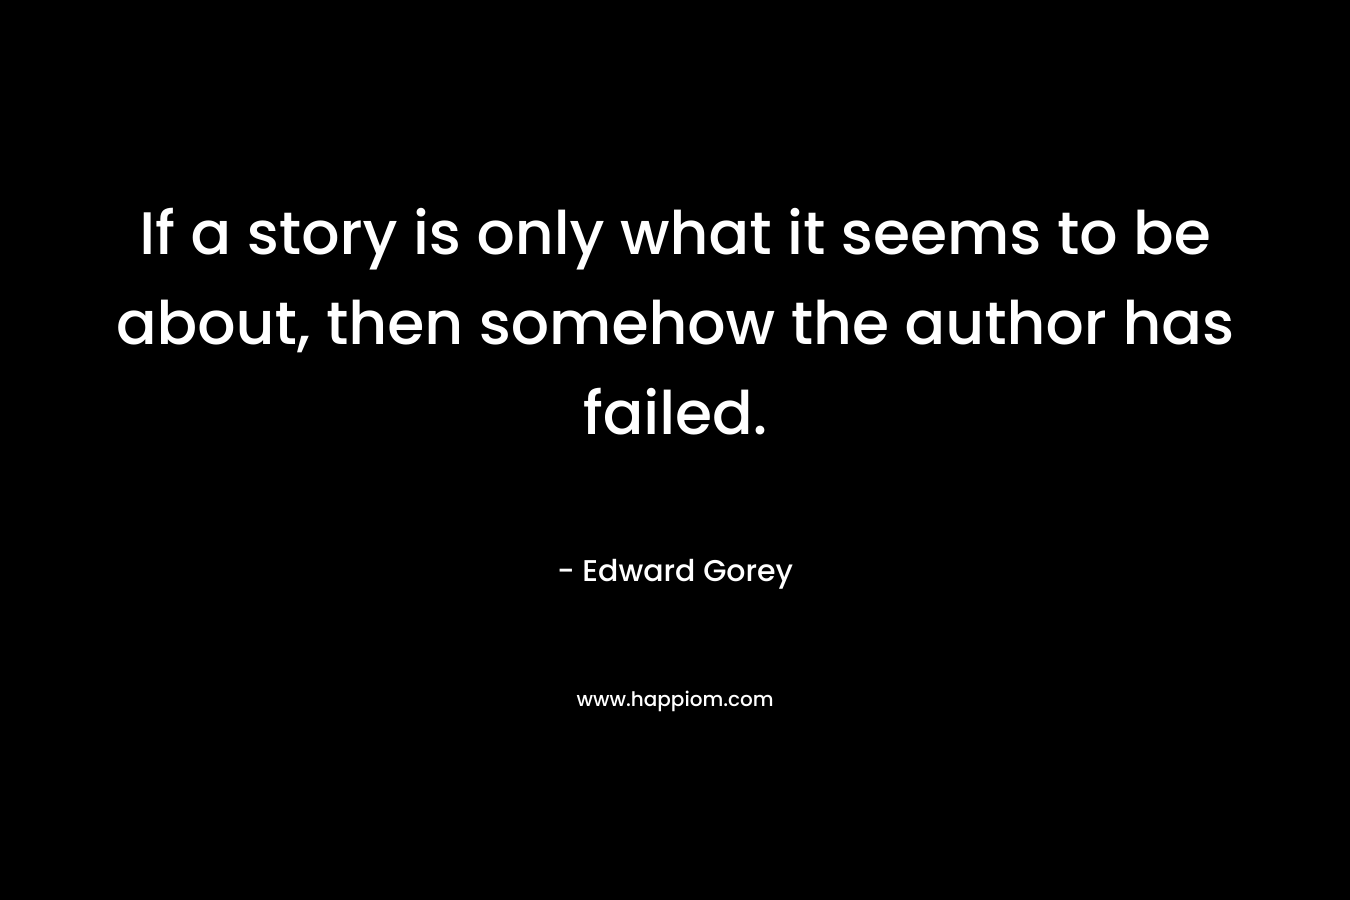 If a story is only what it seems to be about, then somehow the author has failed.